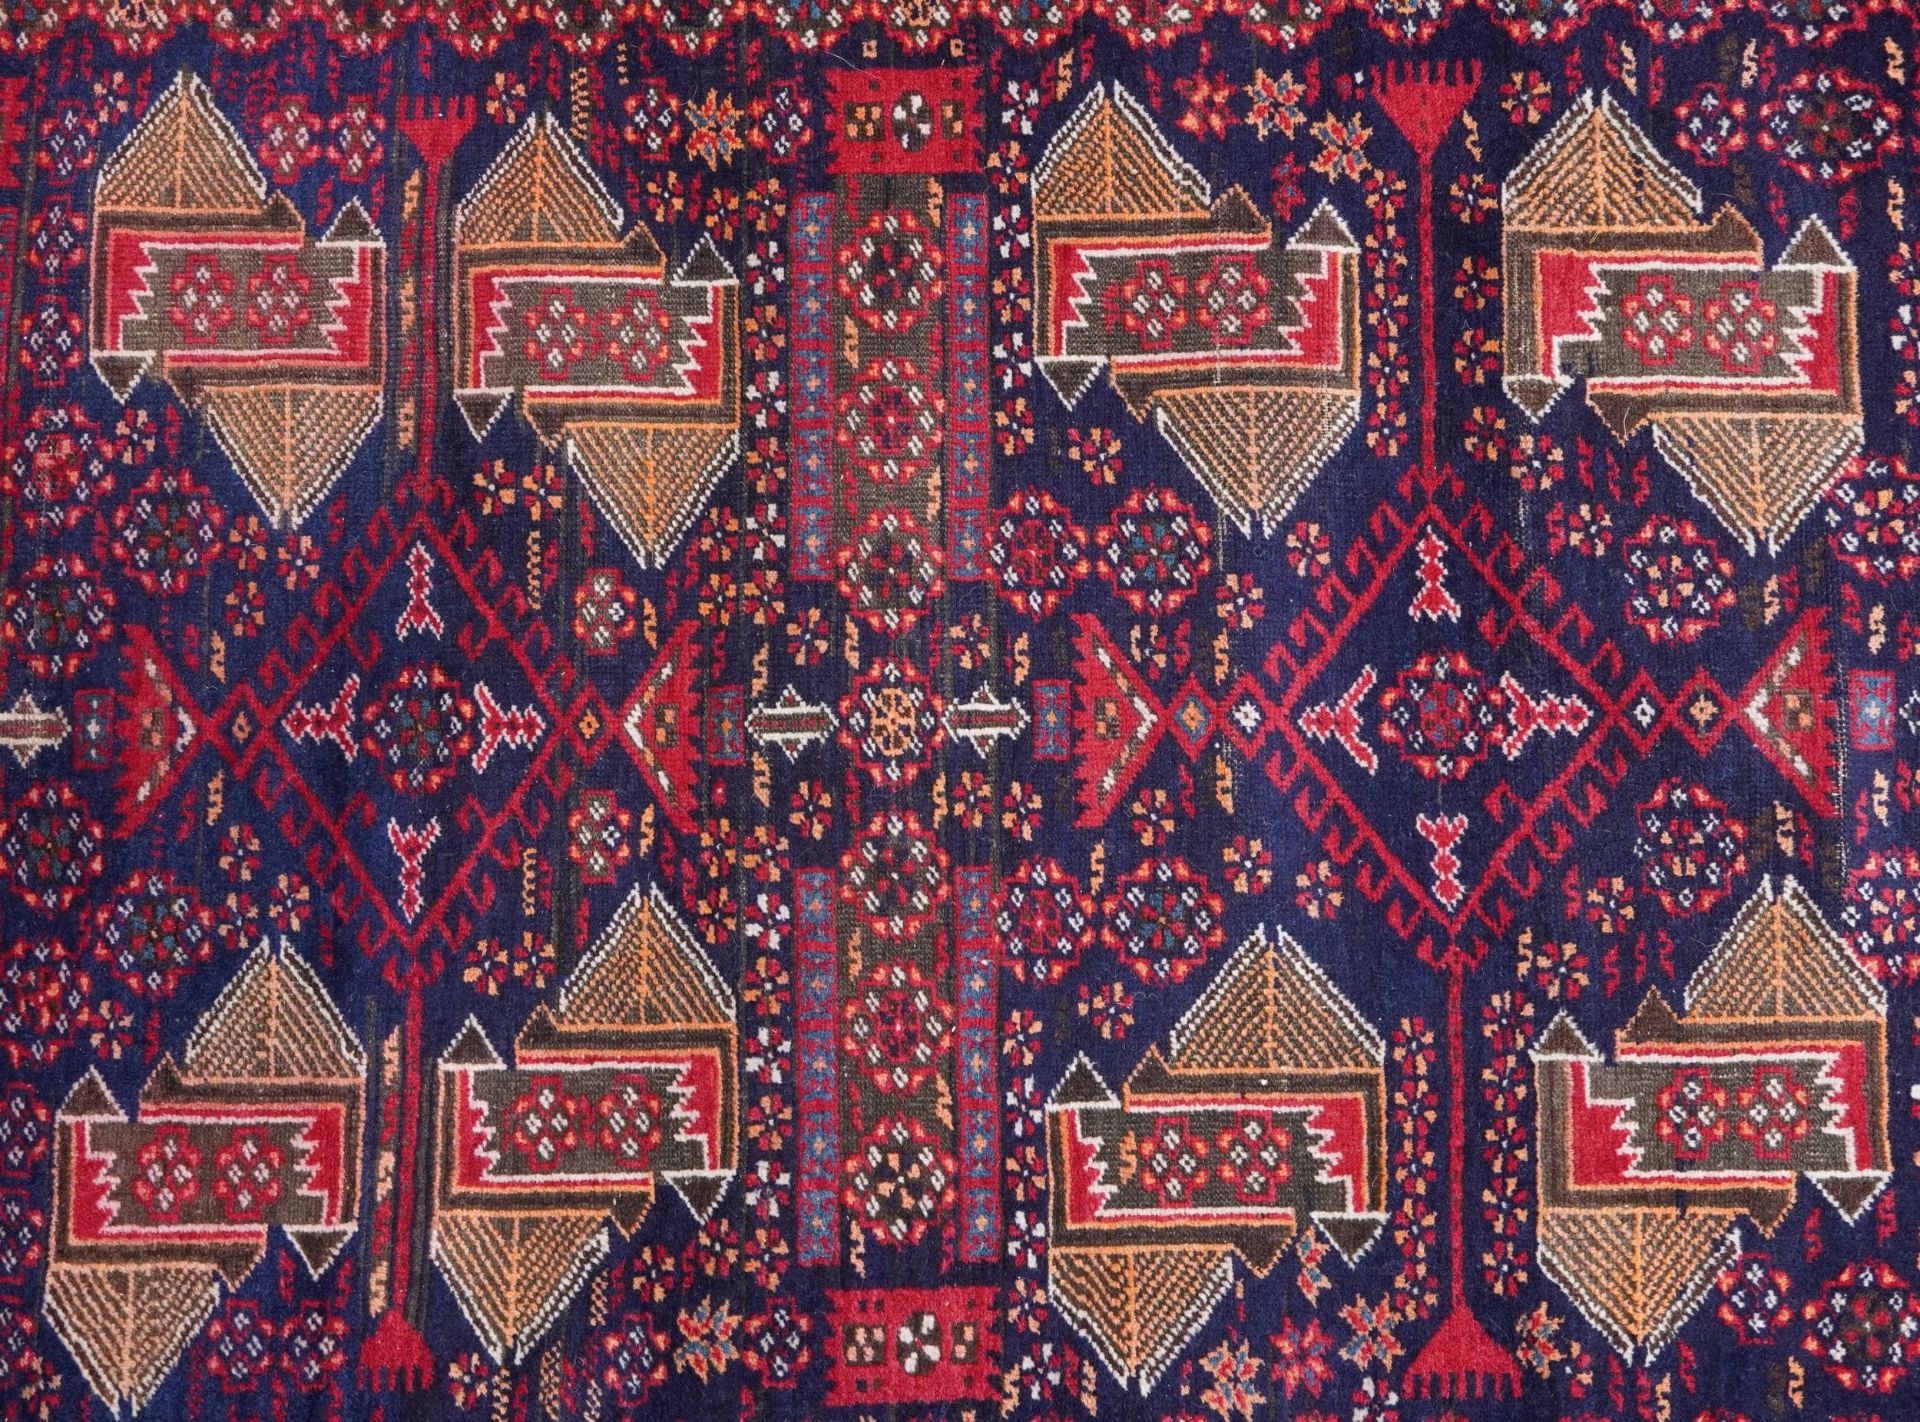 Rectangular Persian rug having an allover repeat geometric design, 230cm x 110cm : For further - Image 2 of 5